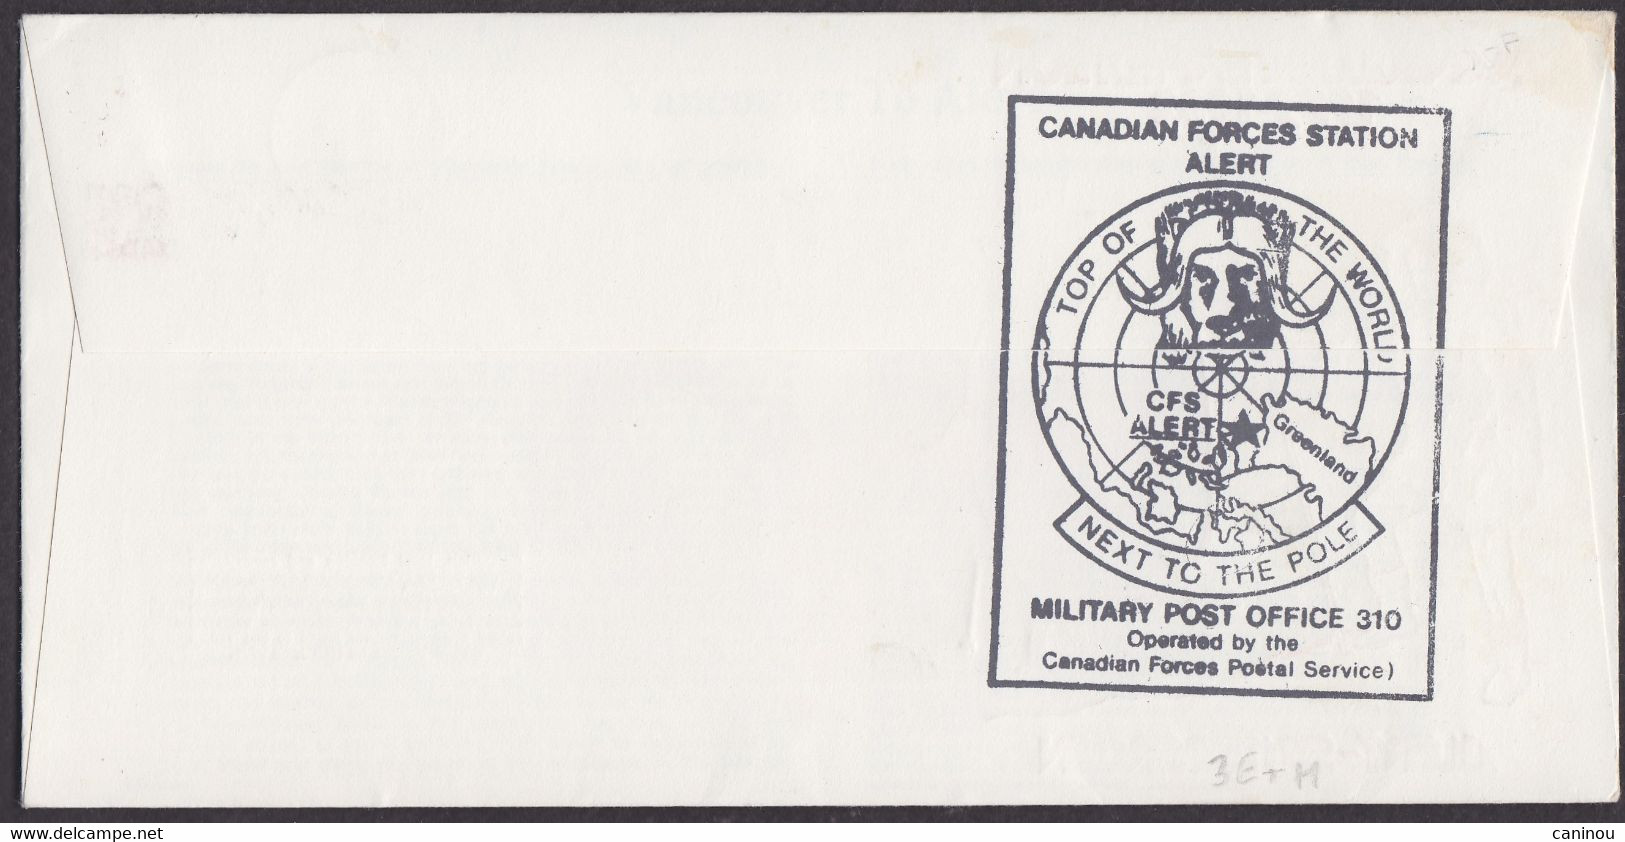 CANADA ENVELOPPE EXPEDITION POLAIRE 1982 - Commemorative Covers